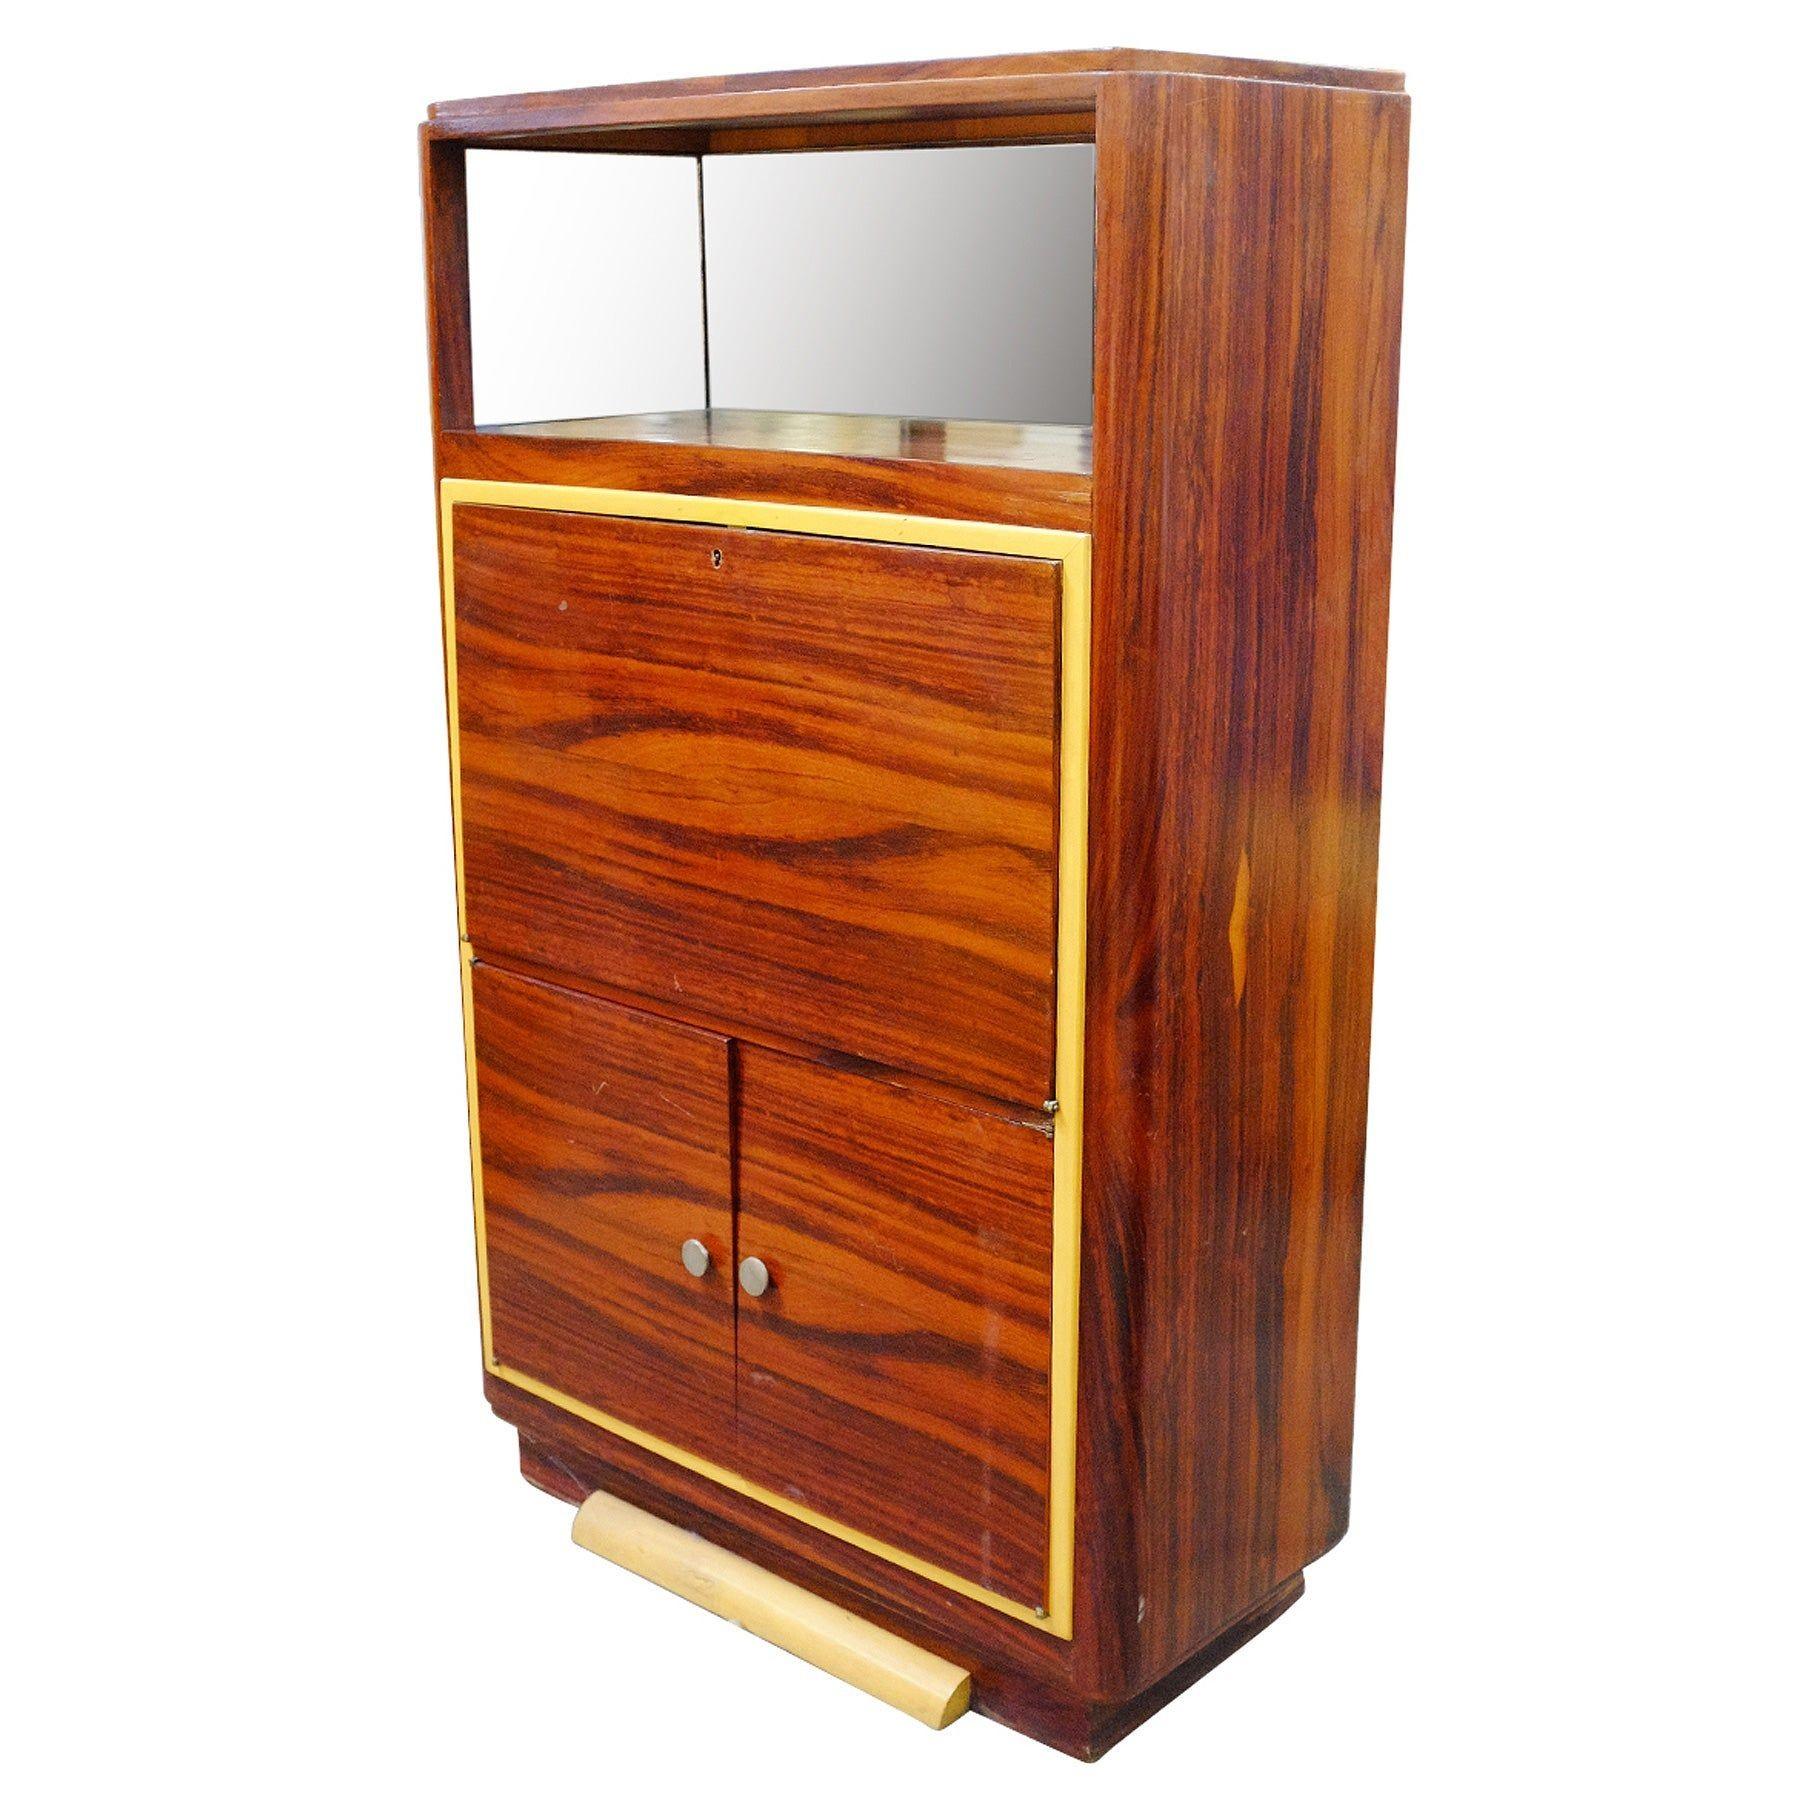 Art Deco Macassar Ebony Vitrine Cabinet with Bar and Secretary Desk In Good Condition For Sale In Van Nuys, CA